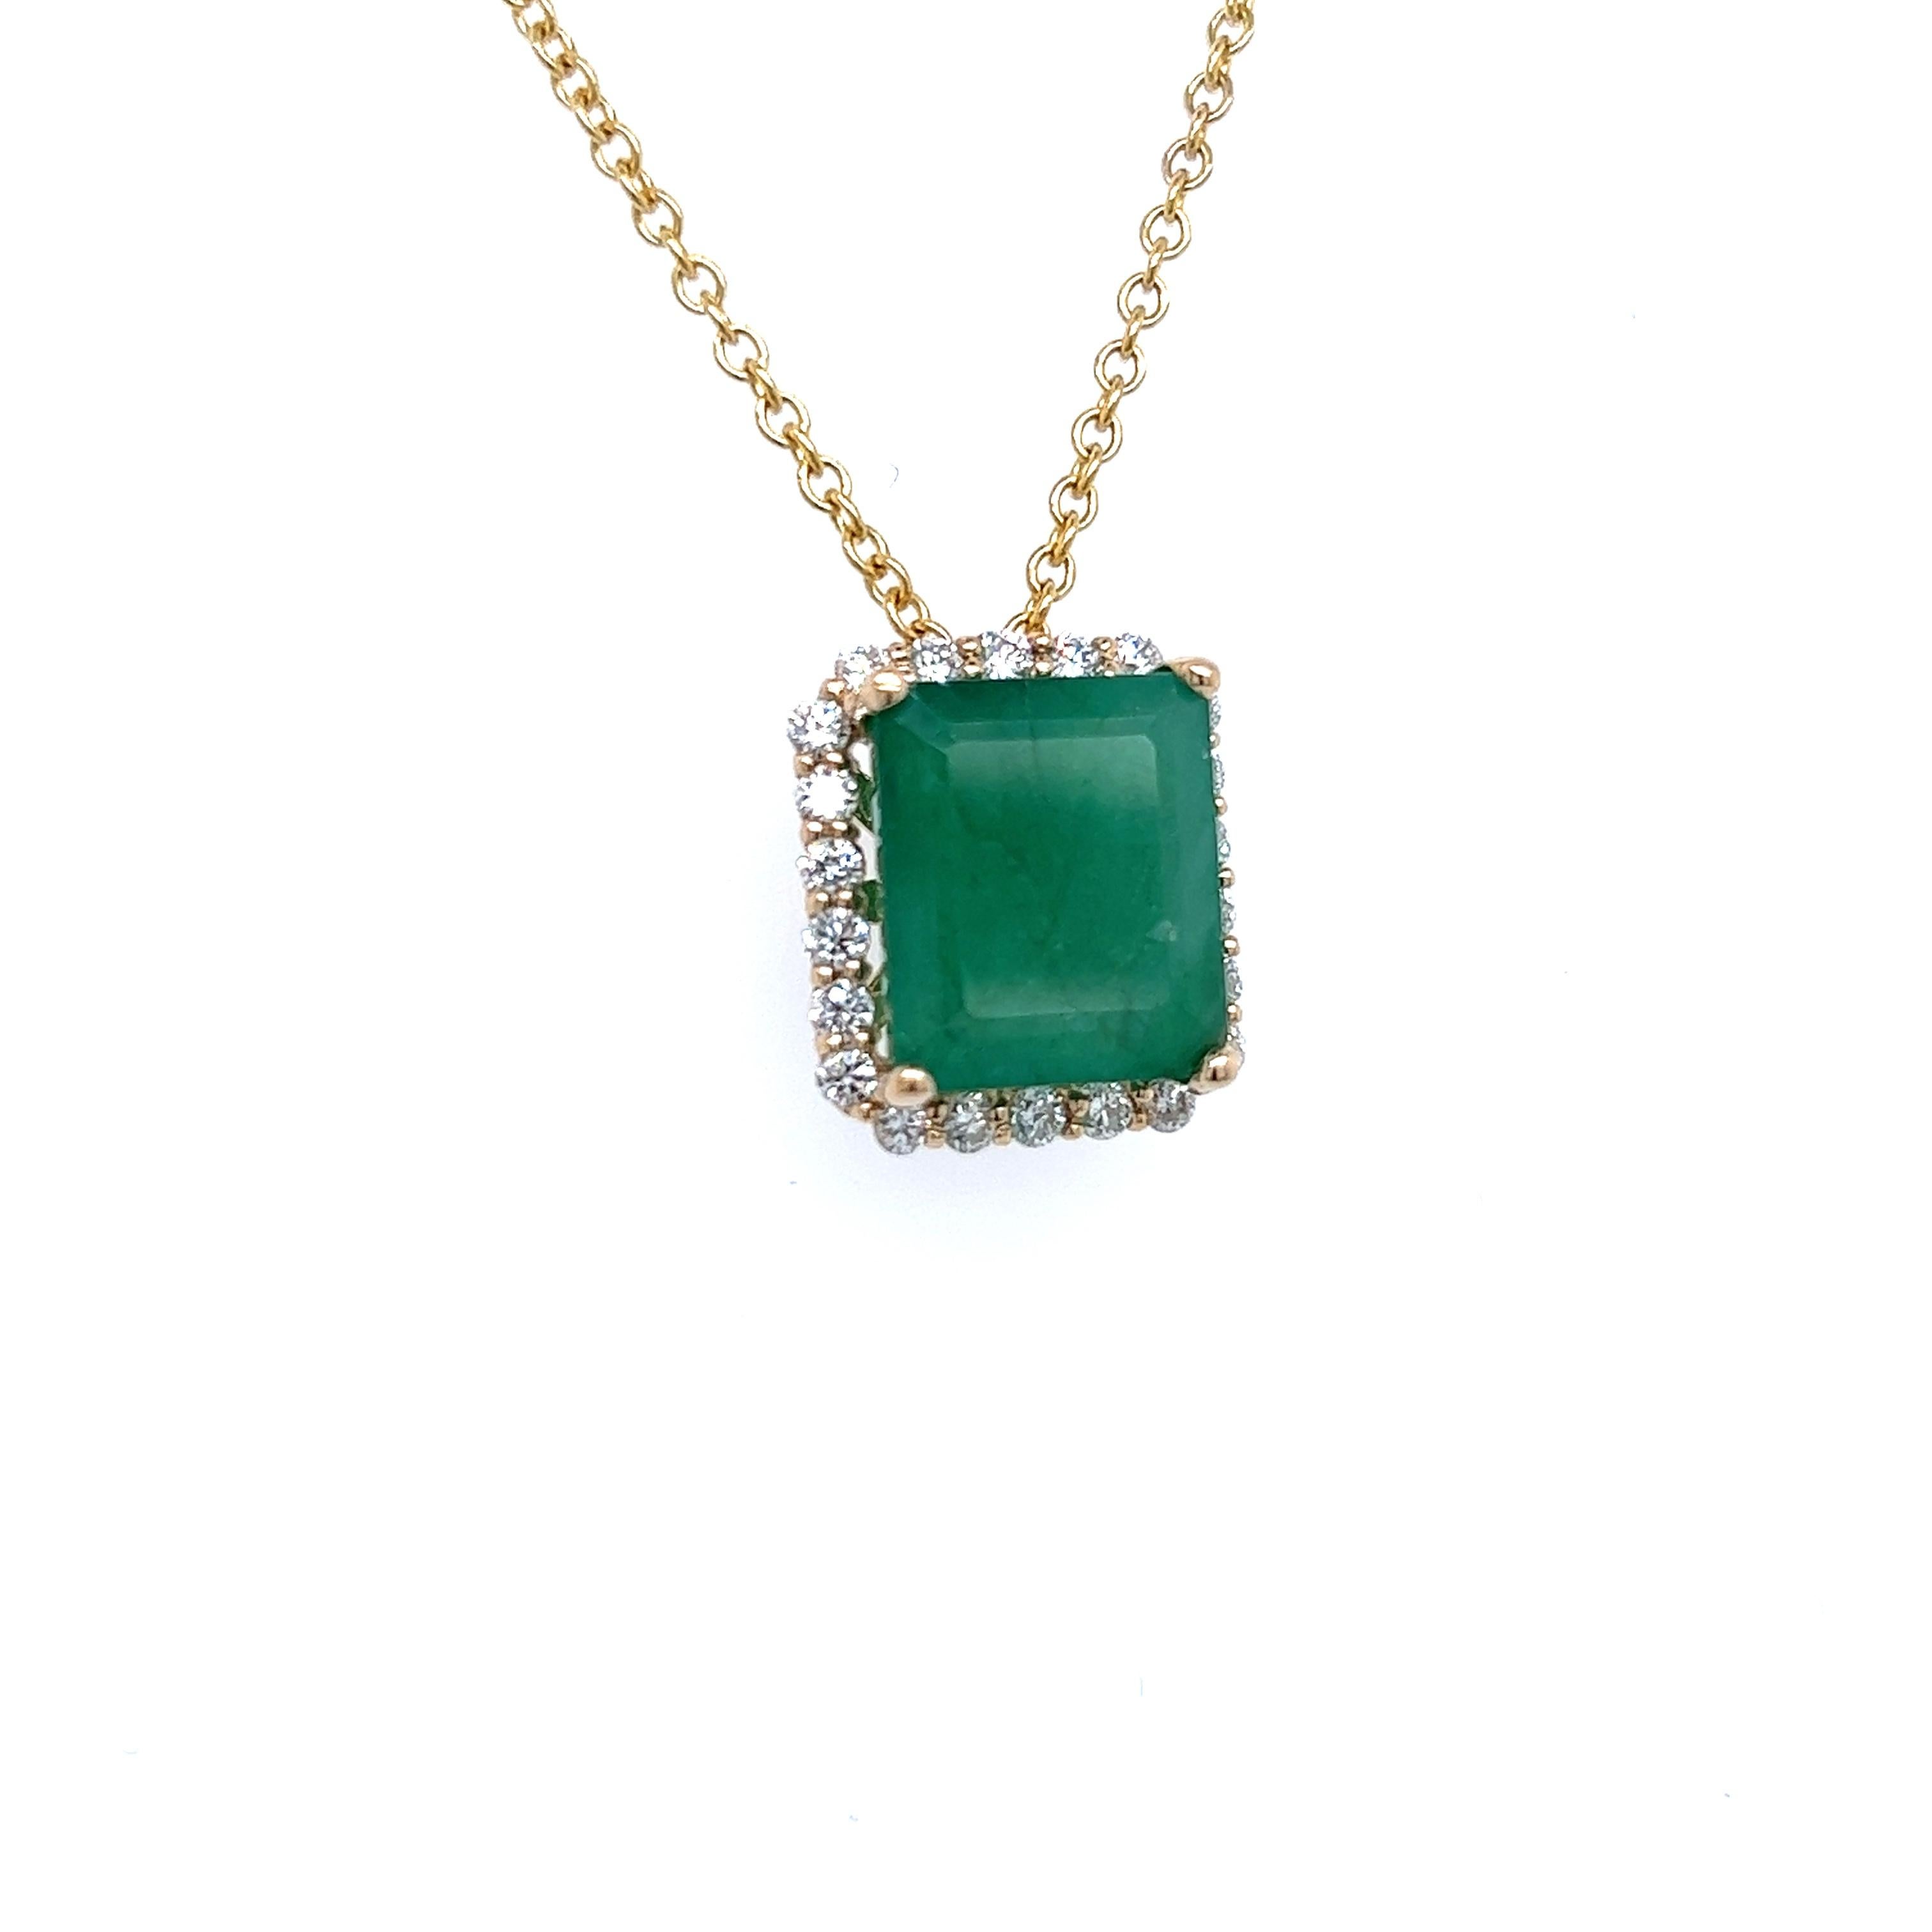 Natural Emerald Diamond Pendant Necklace 14k Yellow Gold 5.05 TCW Certified For Sale 2